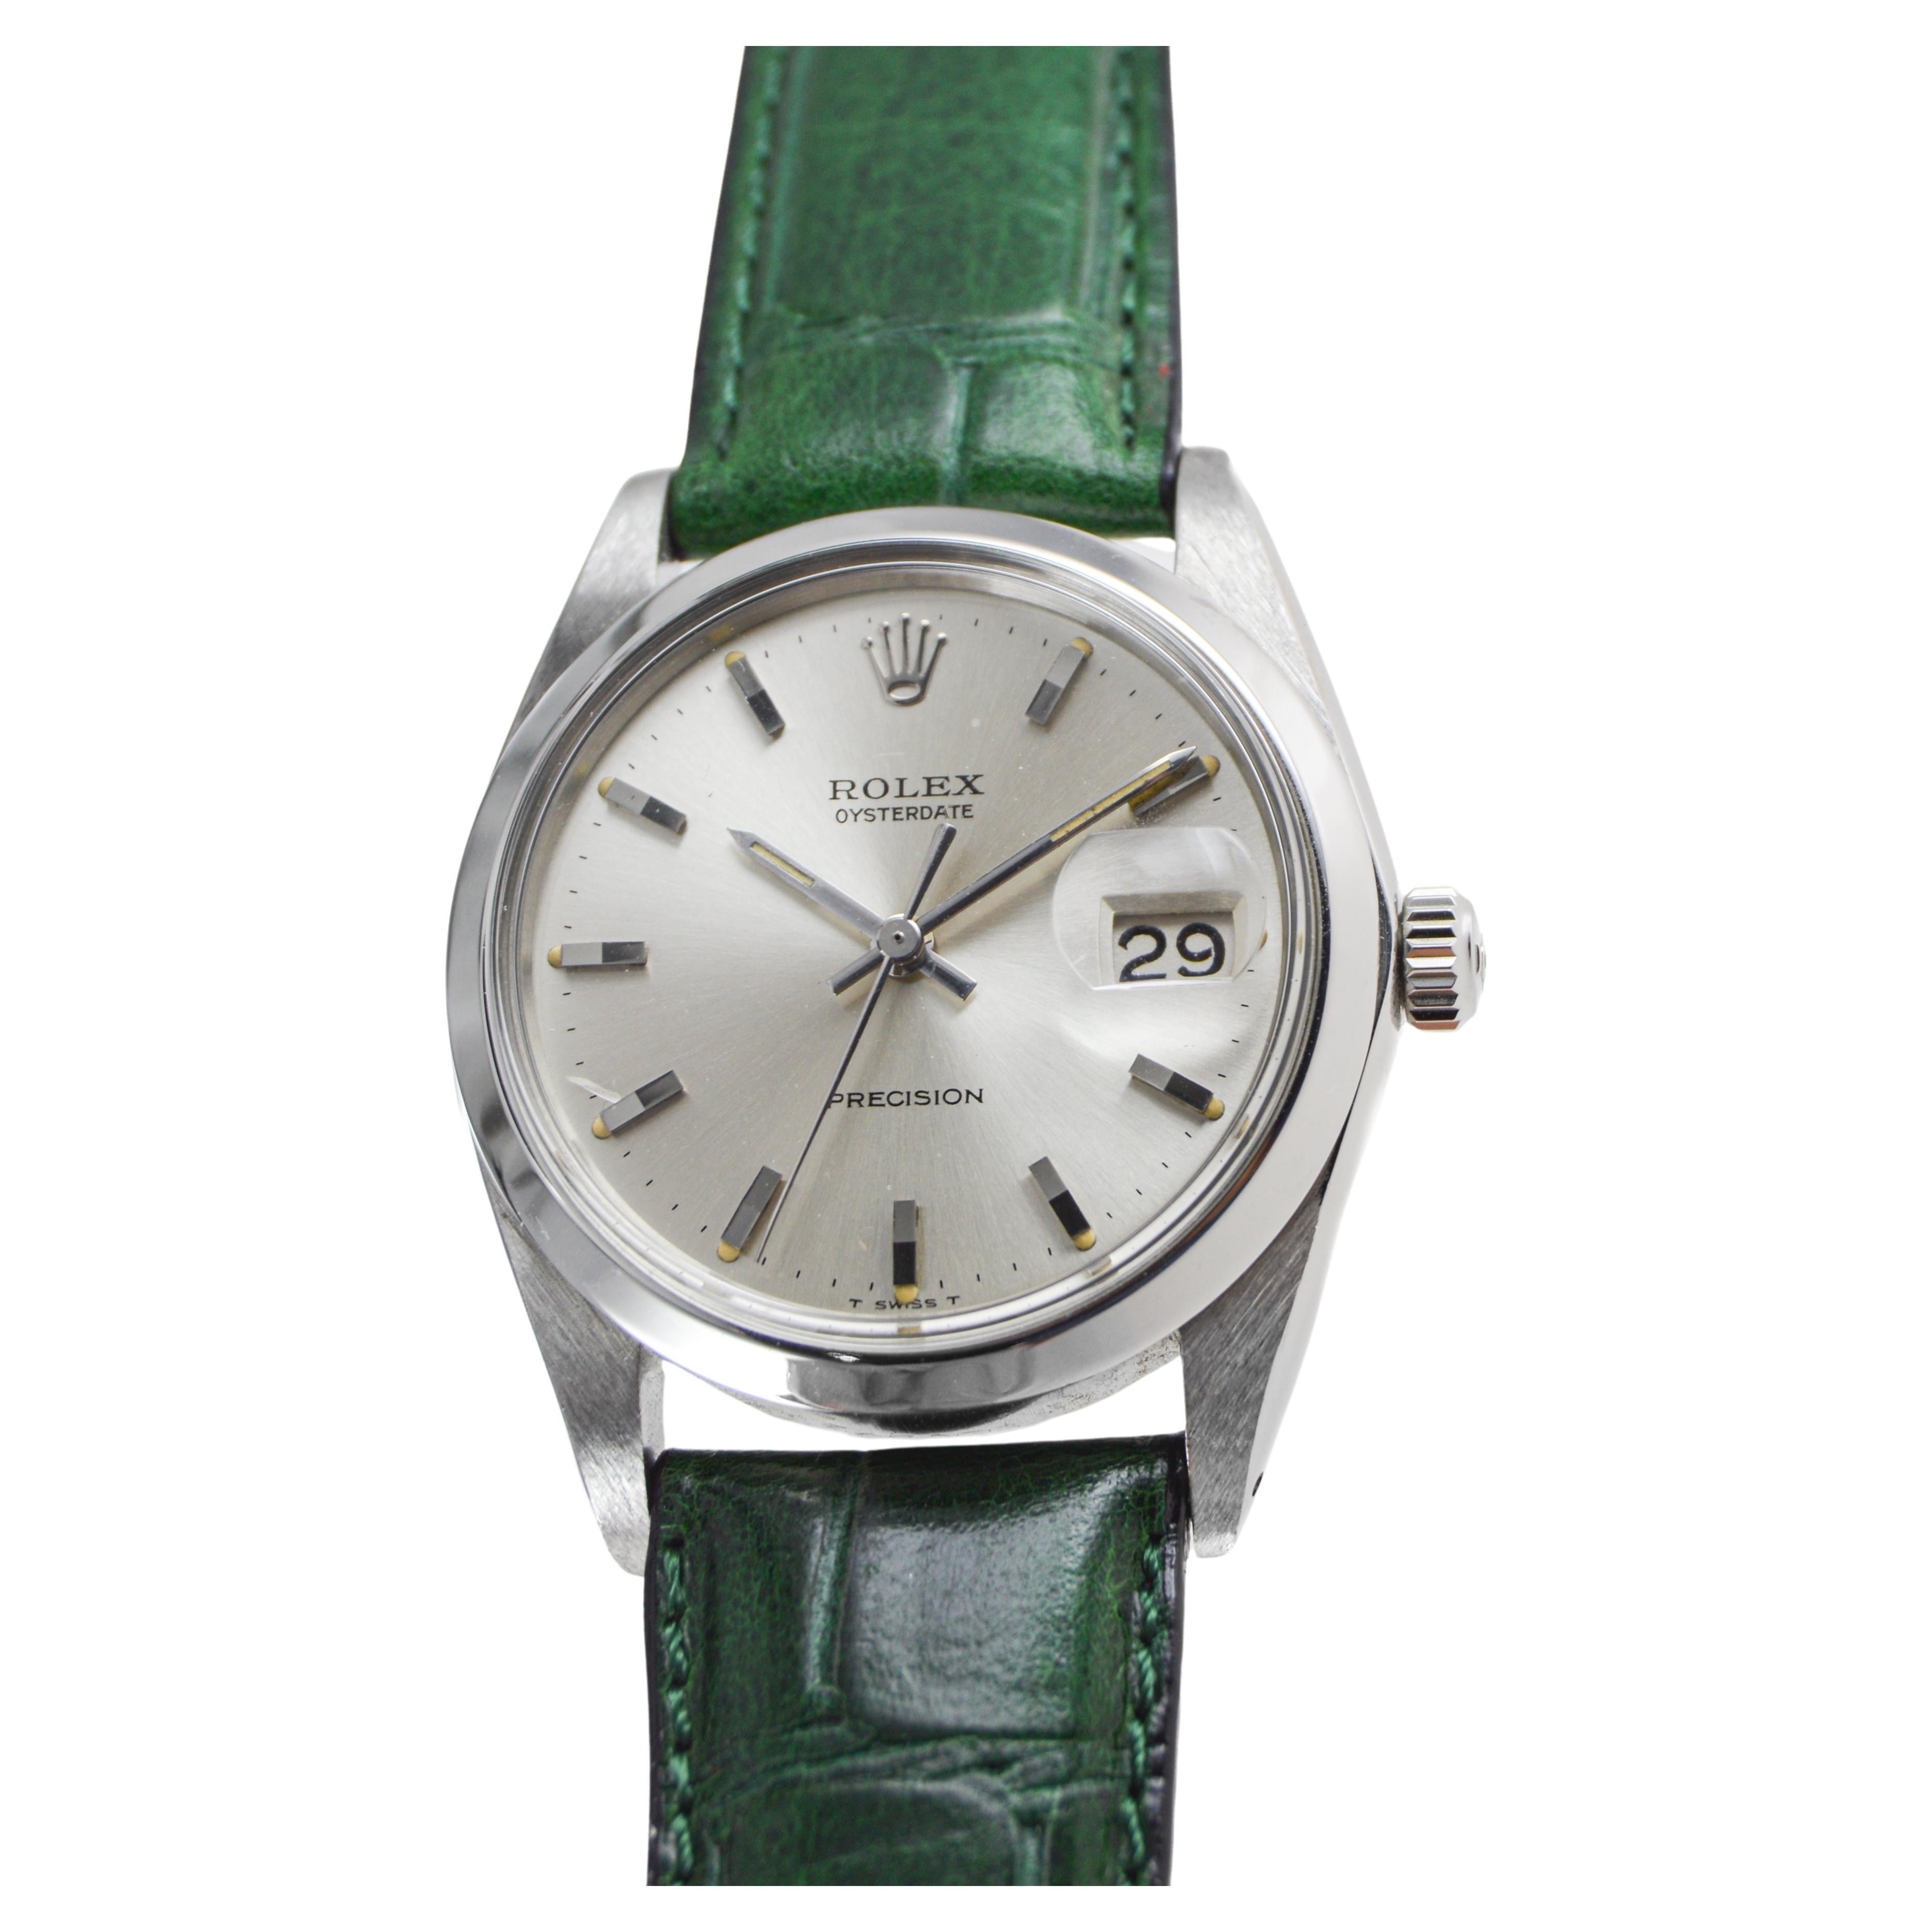 Rolex Stainless Steel Oysterdate with Factory Original Silver Dial circa, 1960's For Sale 2